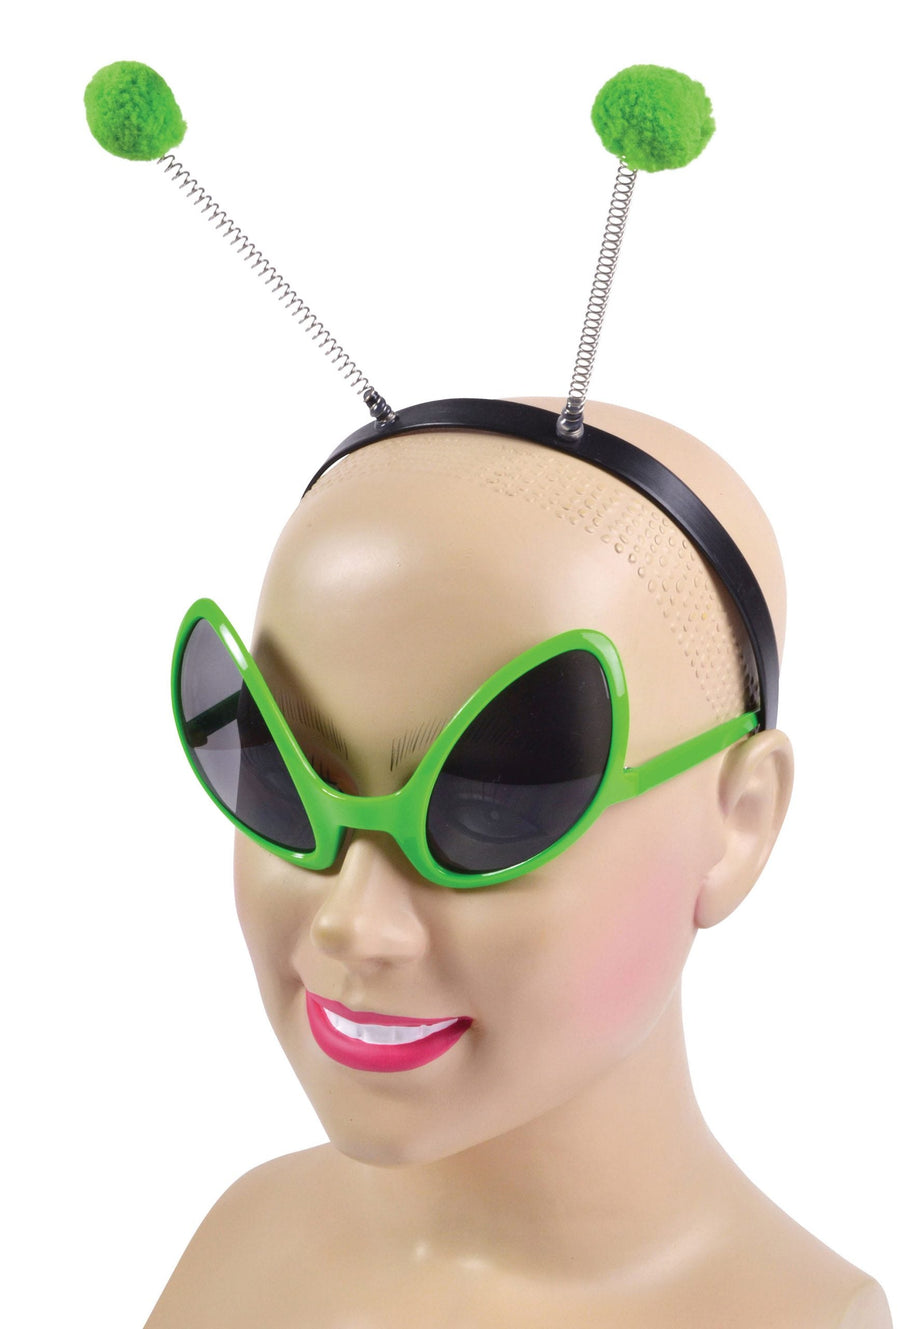 Alien Green Glasses and Antenna Boppers Headband_1